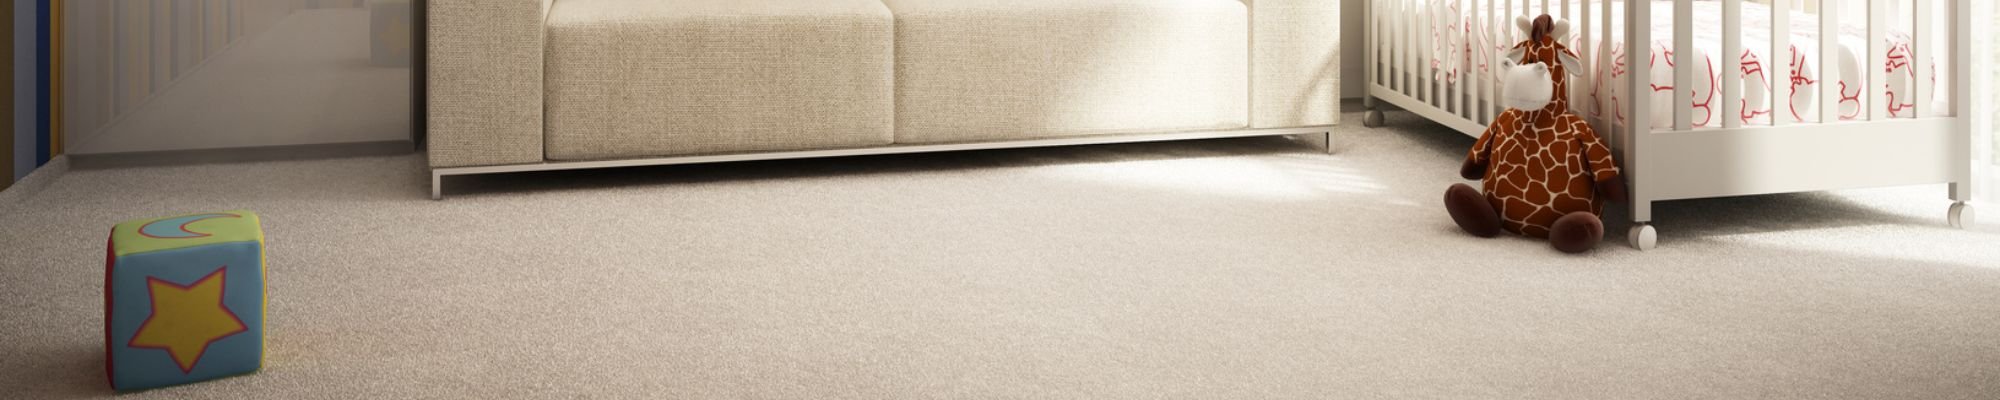 beige carpet flooring from Henson's Greater Tennessee Flooring in Knoxville TN